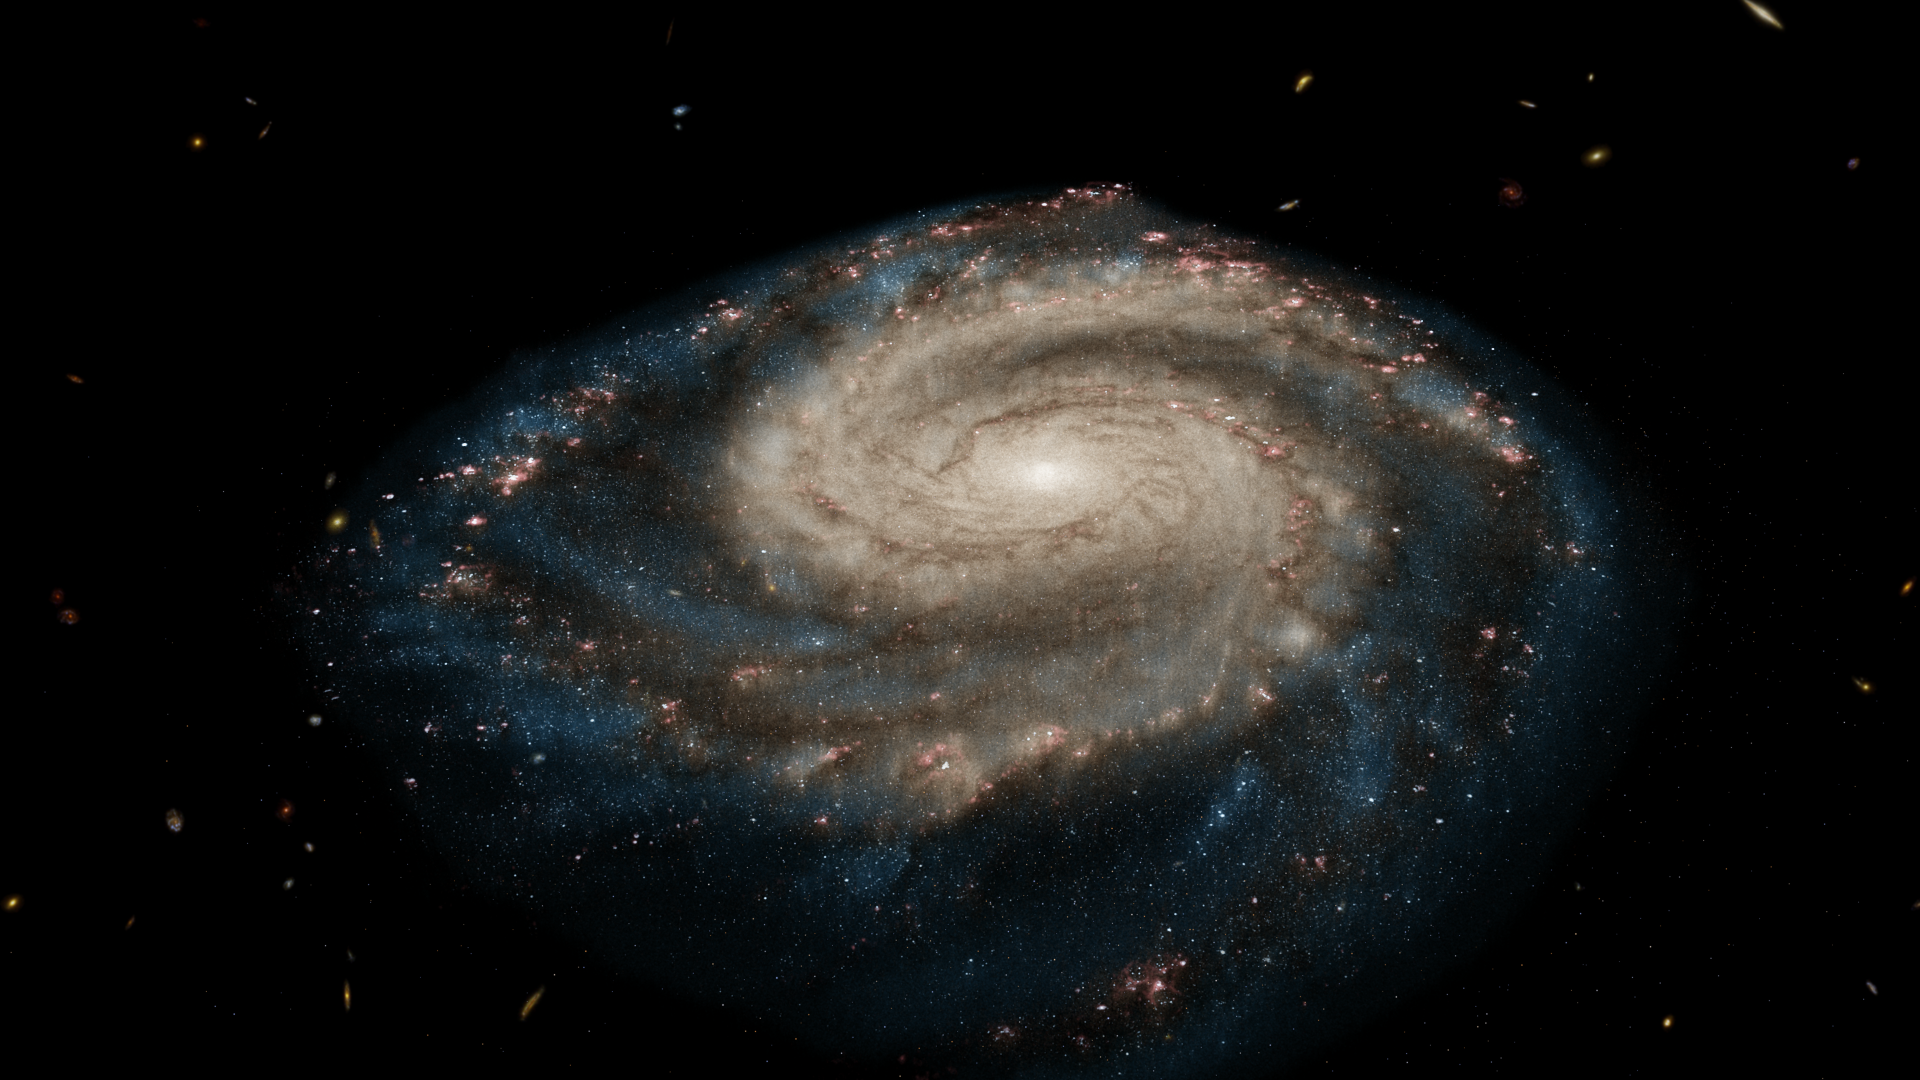 This flight across the Whirlpool Galaxy is visualized using observations from the Hubble Space Telescope.